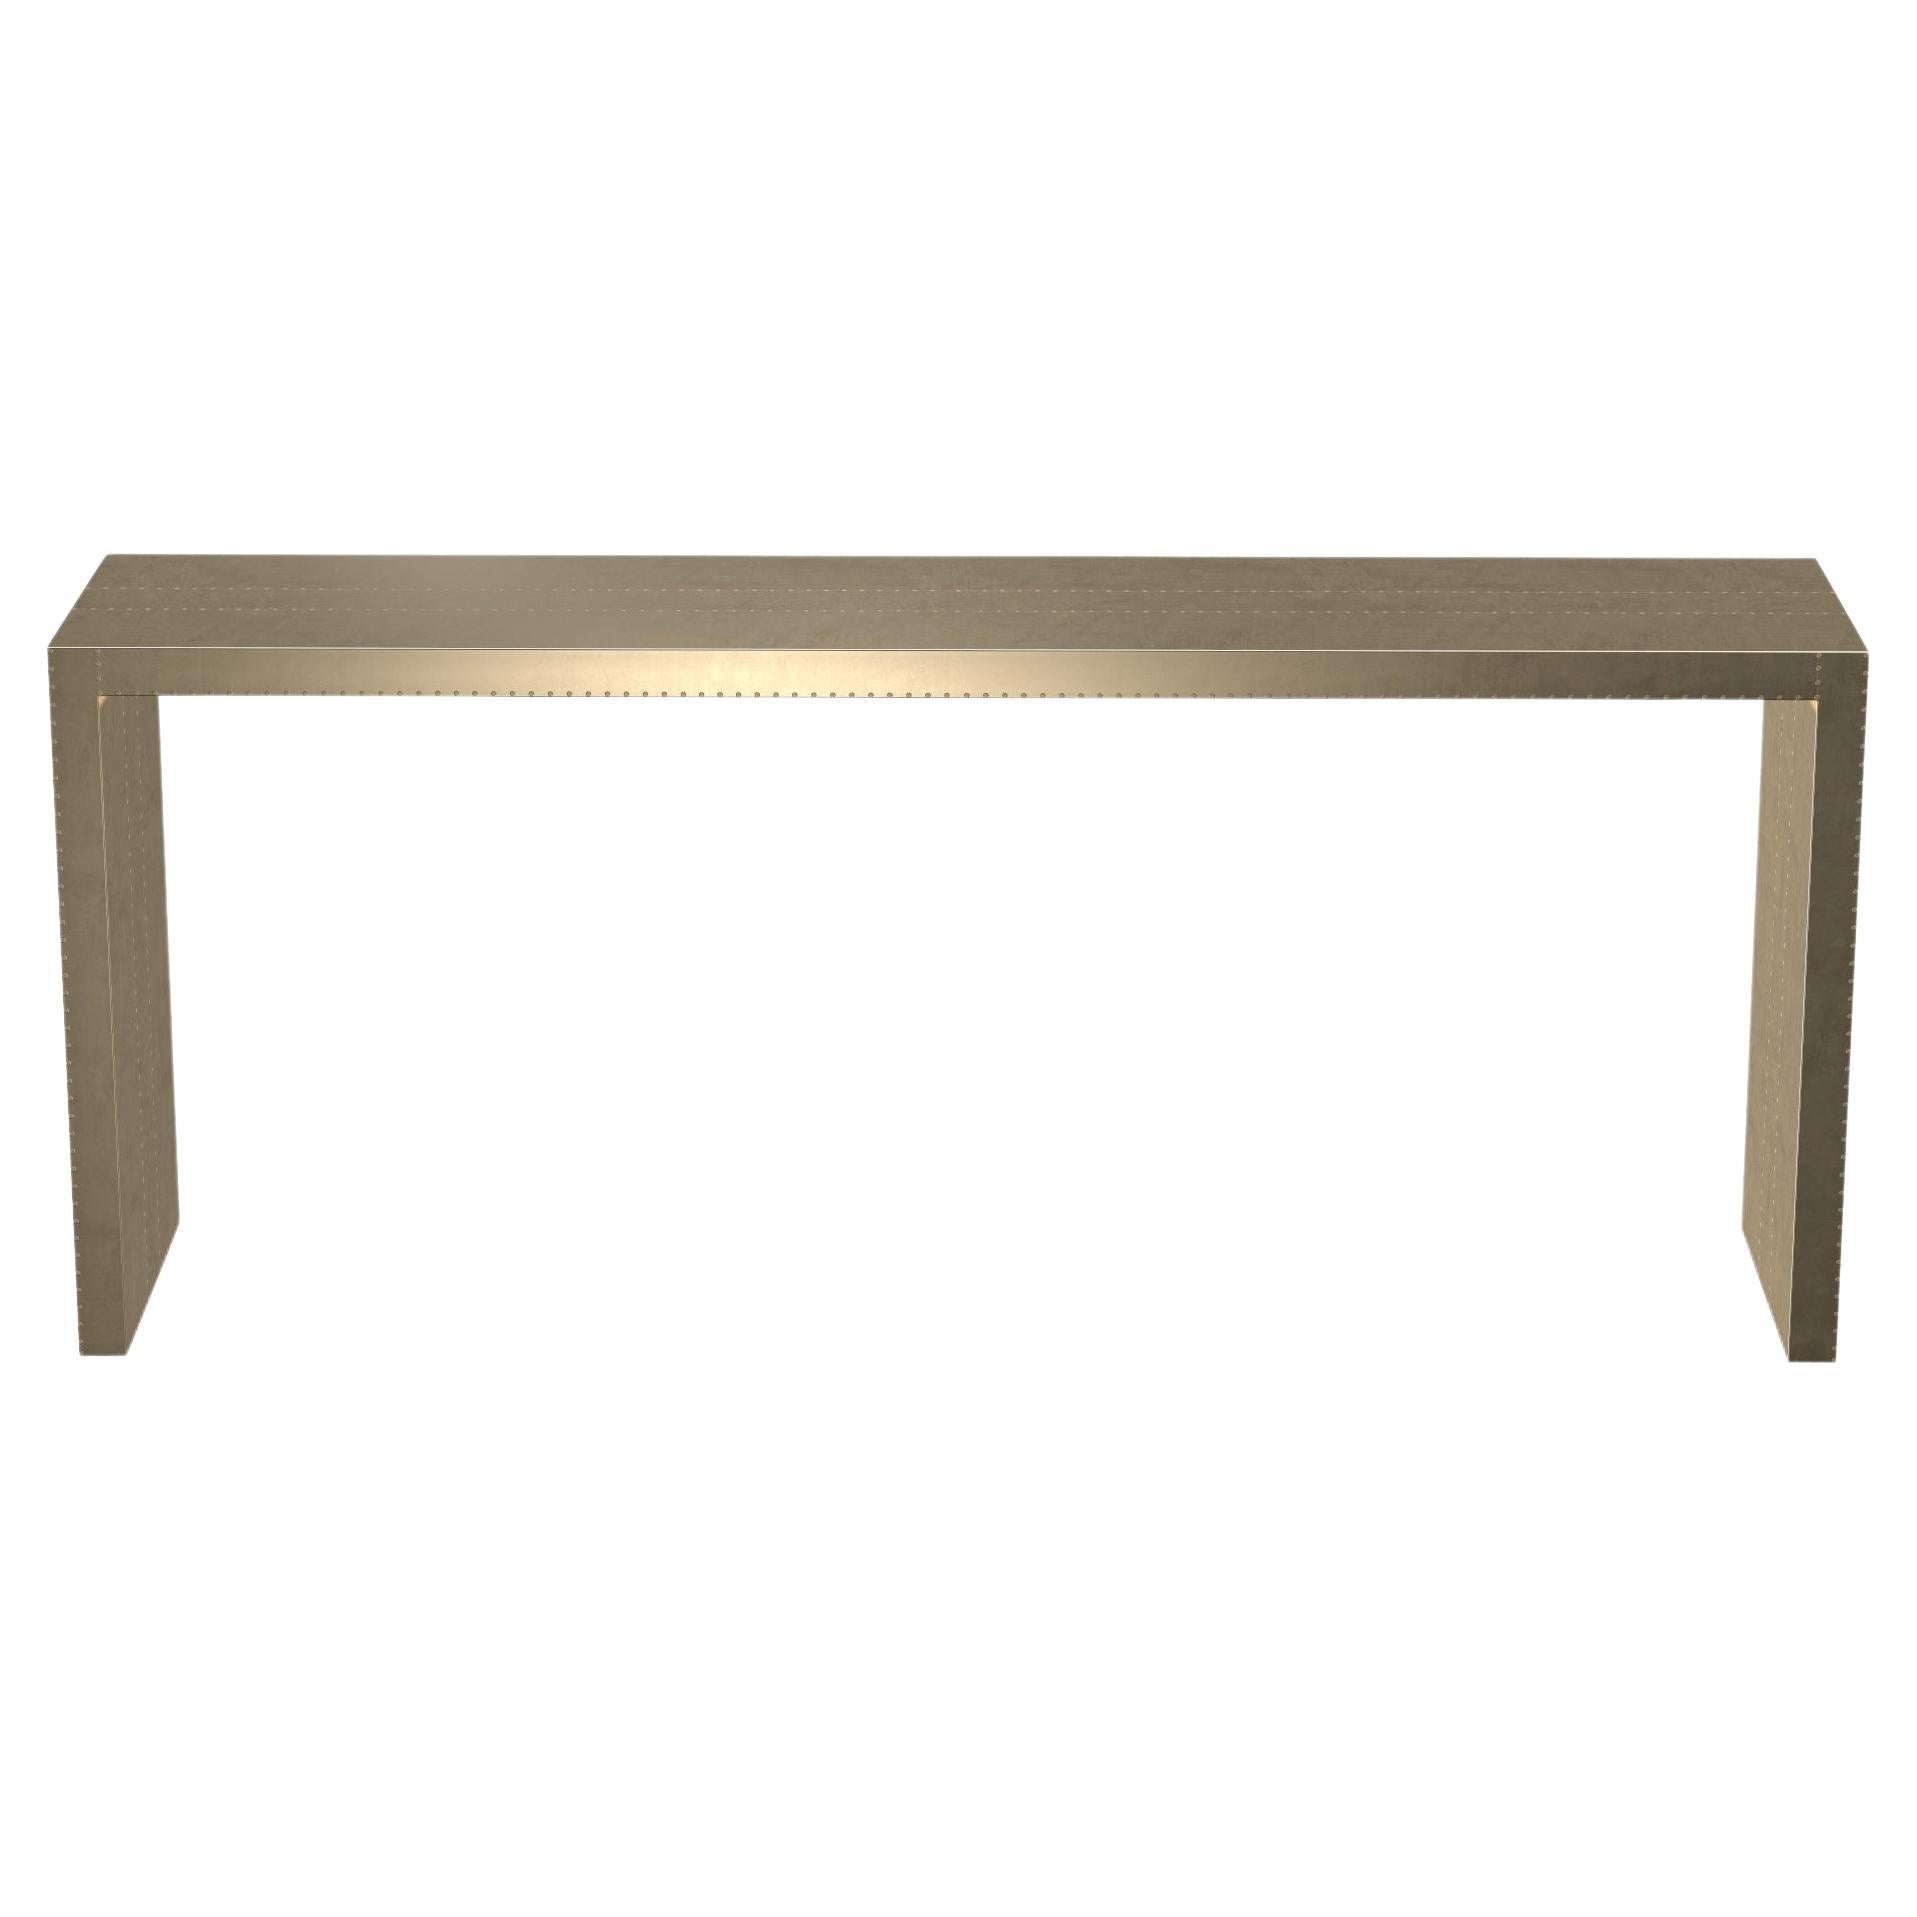 Art Nouveau Tray Tables Rectangular Console in Smooth Brass by Alison Spear For Sale